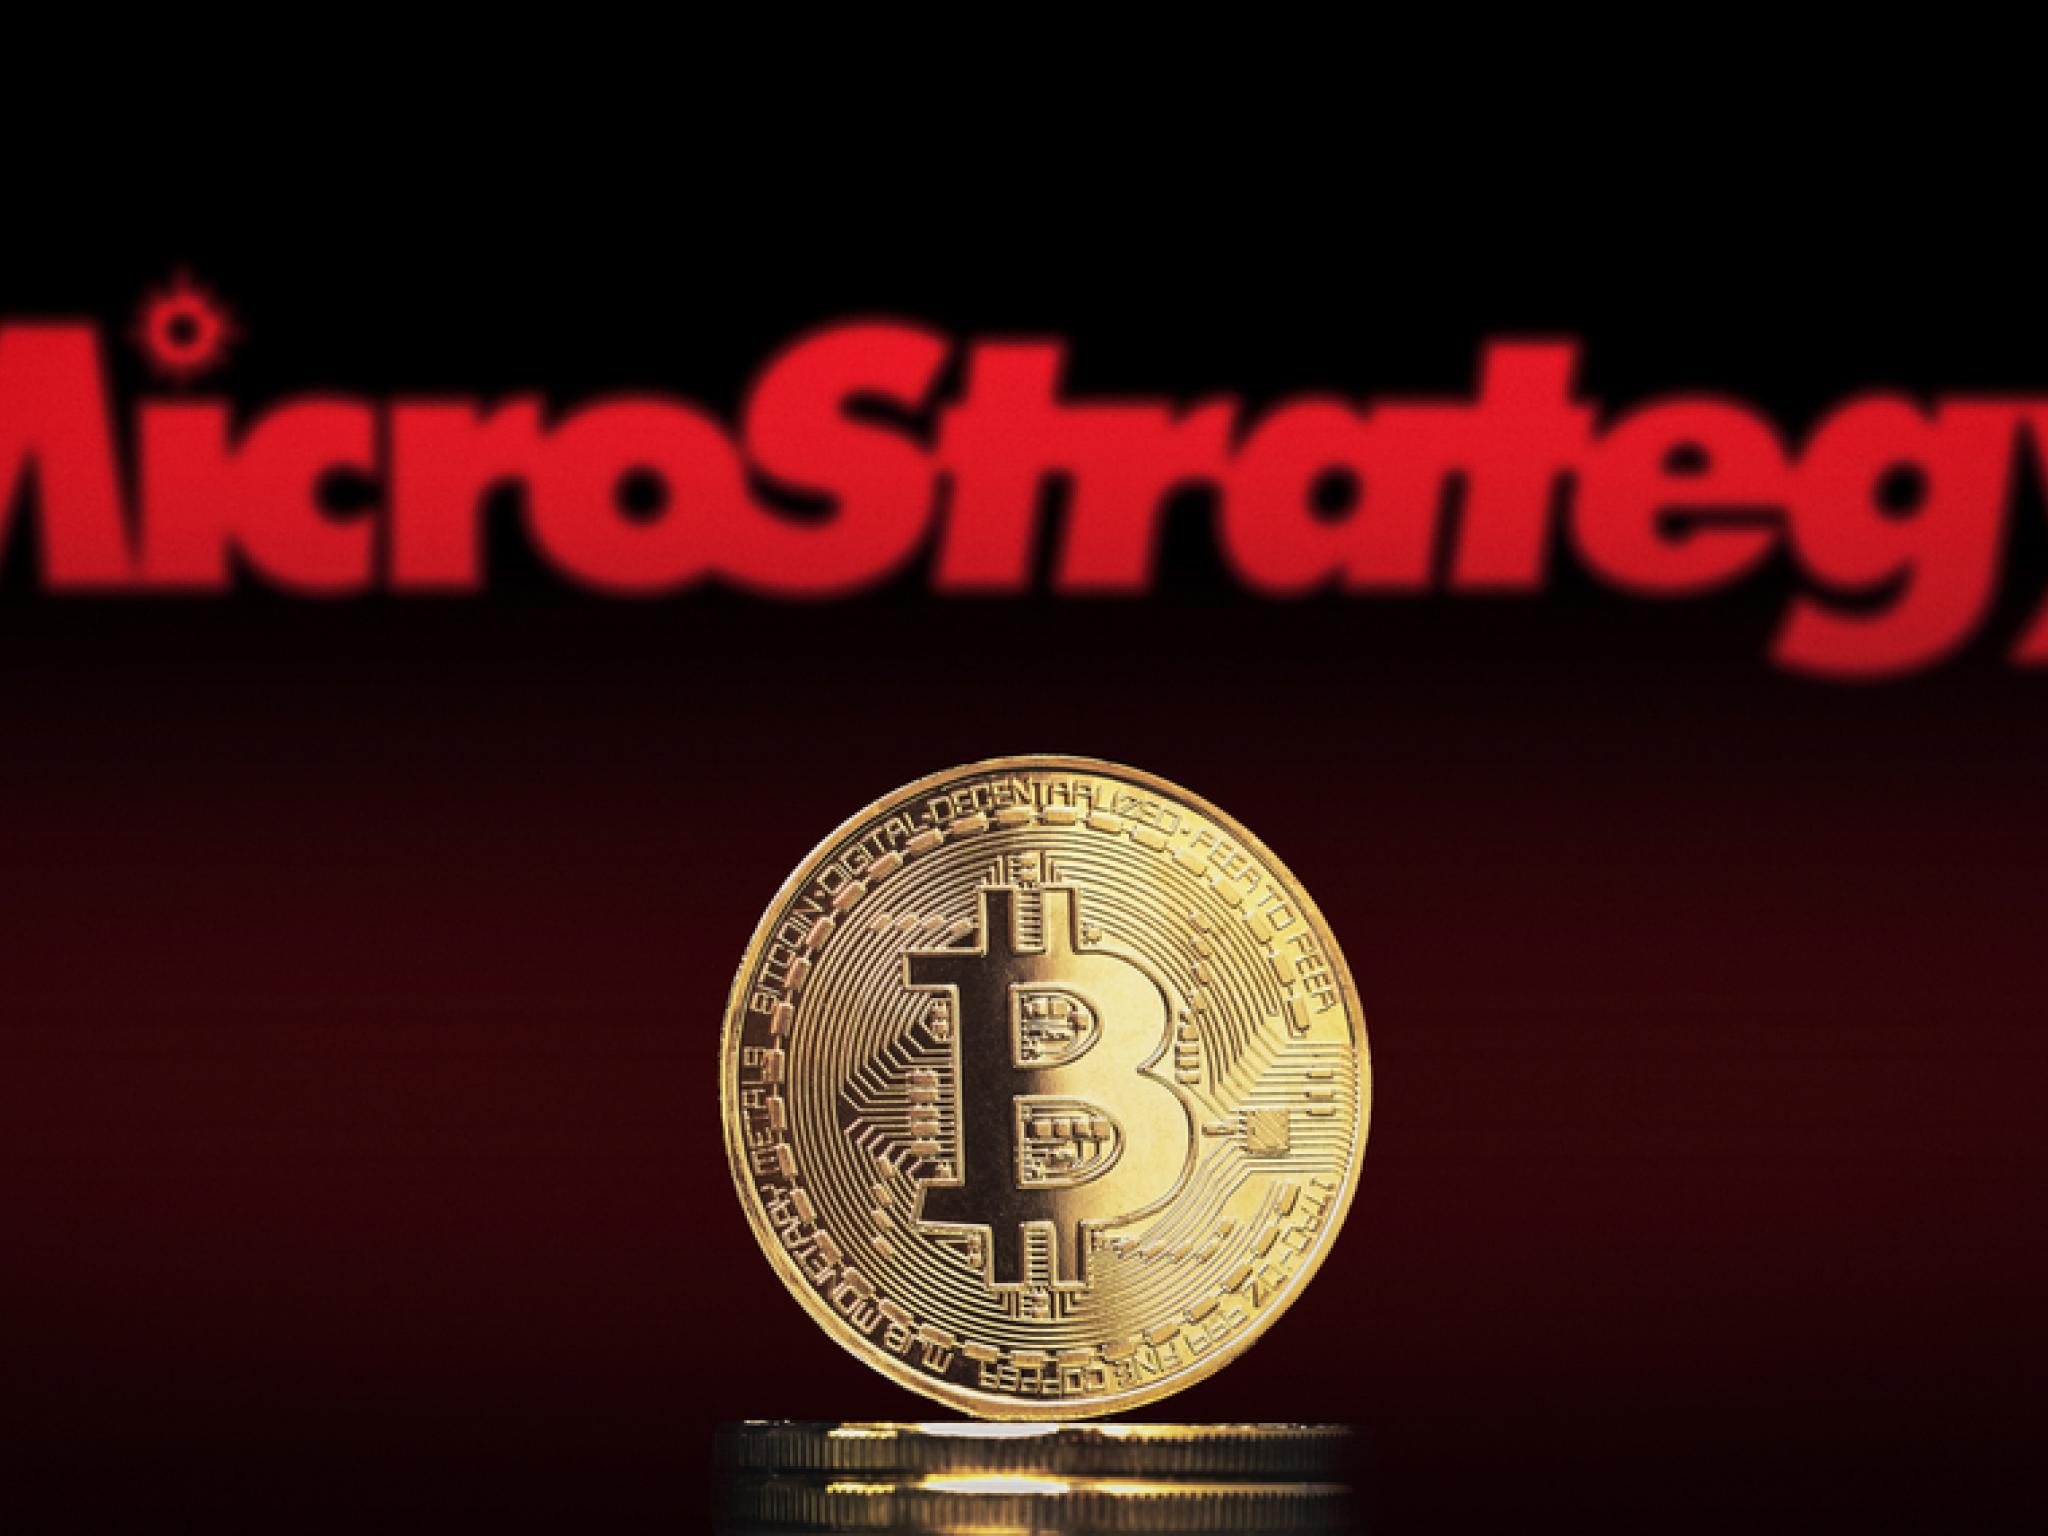  microstrategy-to-raise-500m-to-boost-bitcoin-holdings 